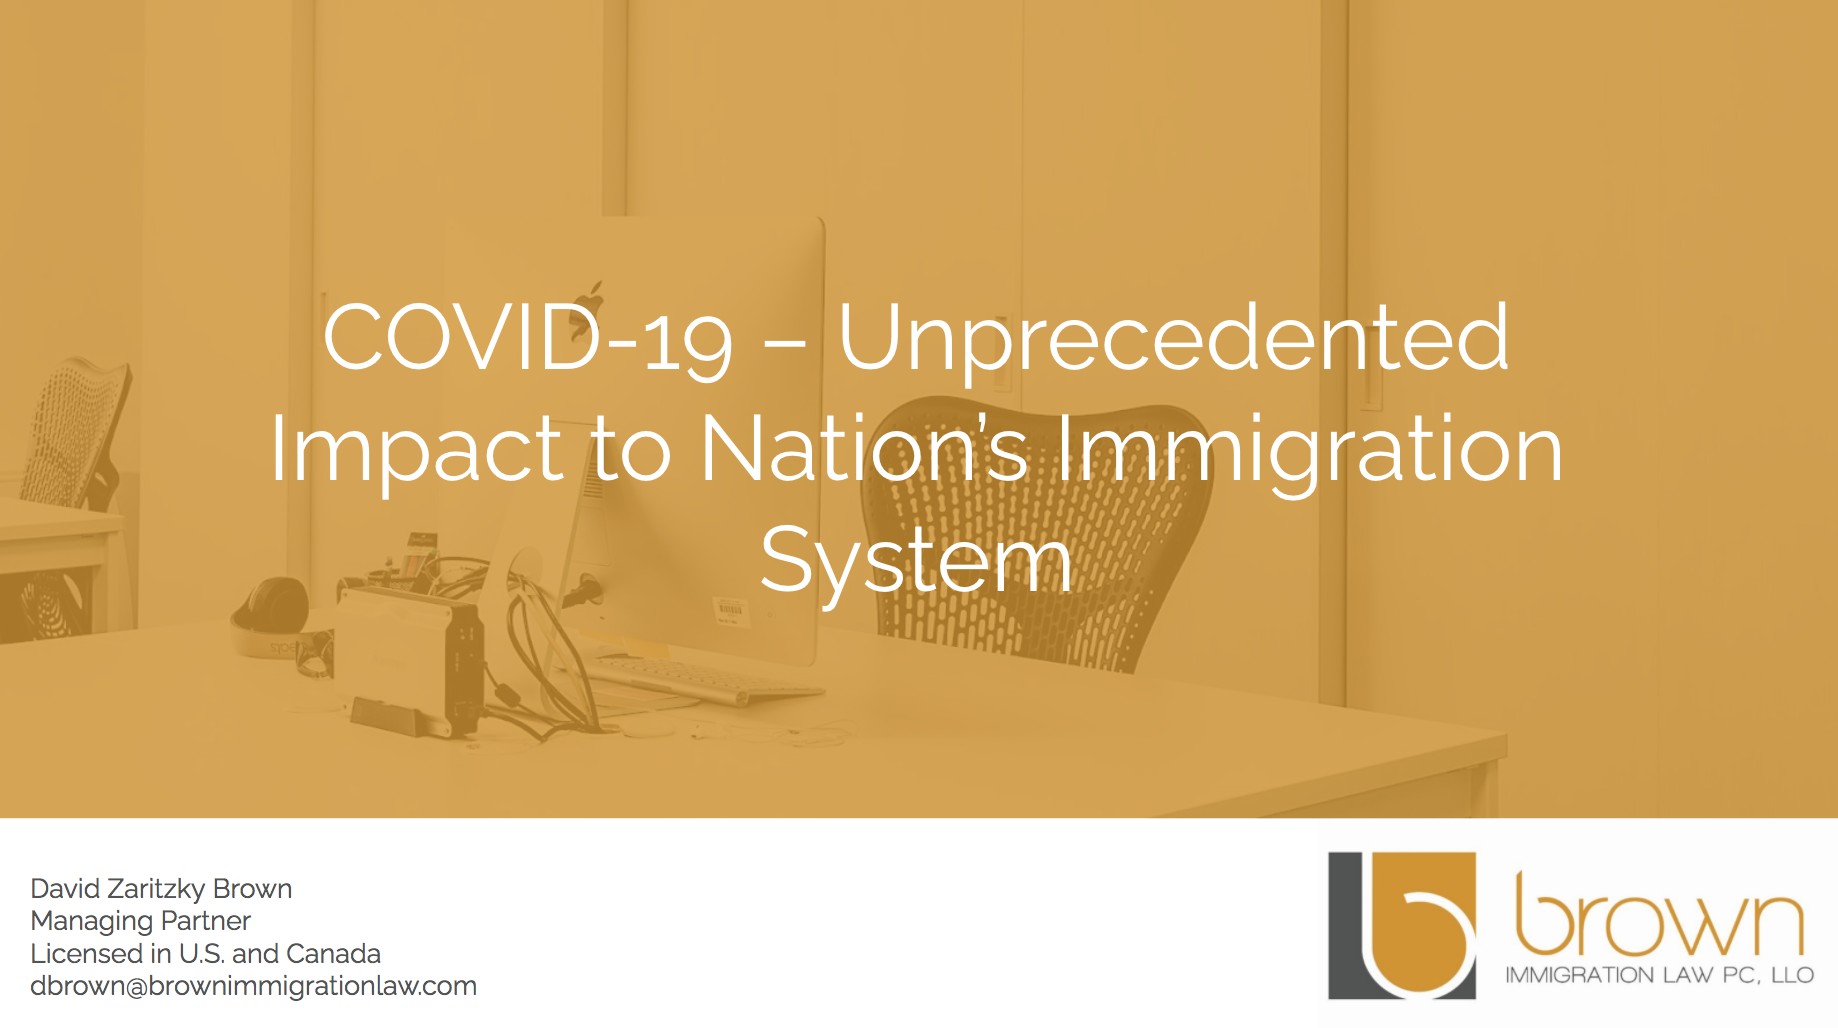 COVID-19 - How to Best Manage the Impact of the Current Pandemic on U.S. Immigration Issues